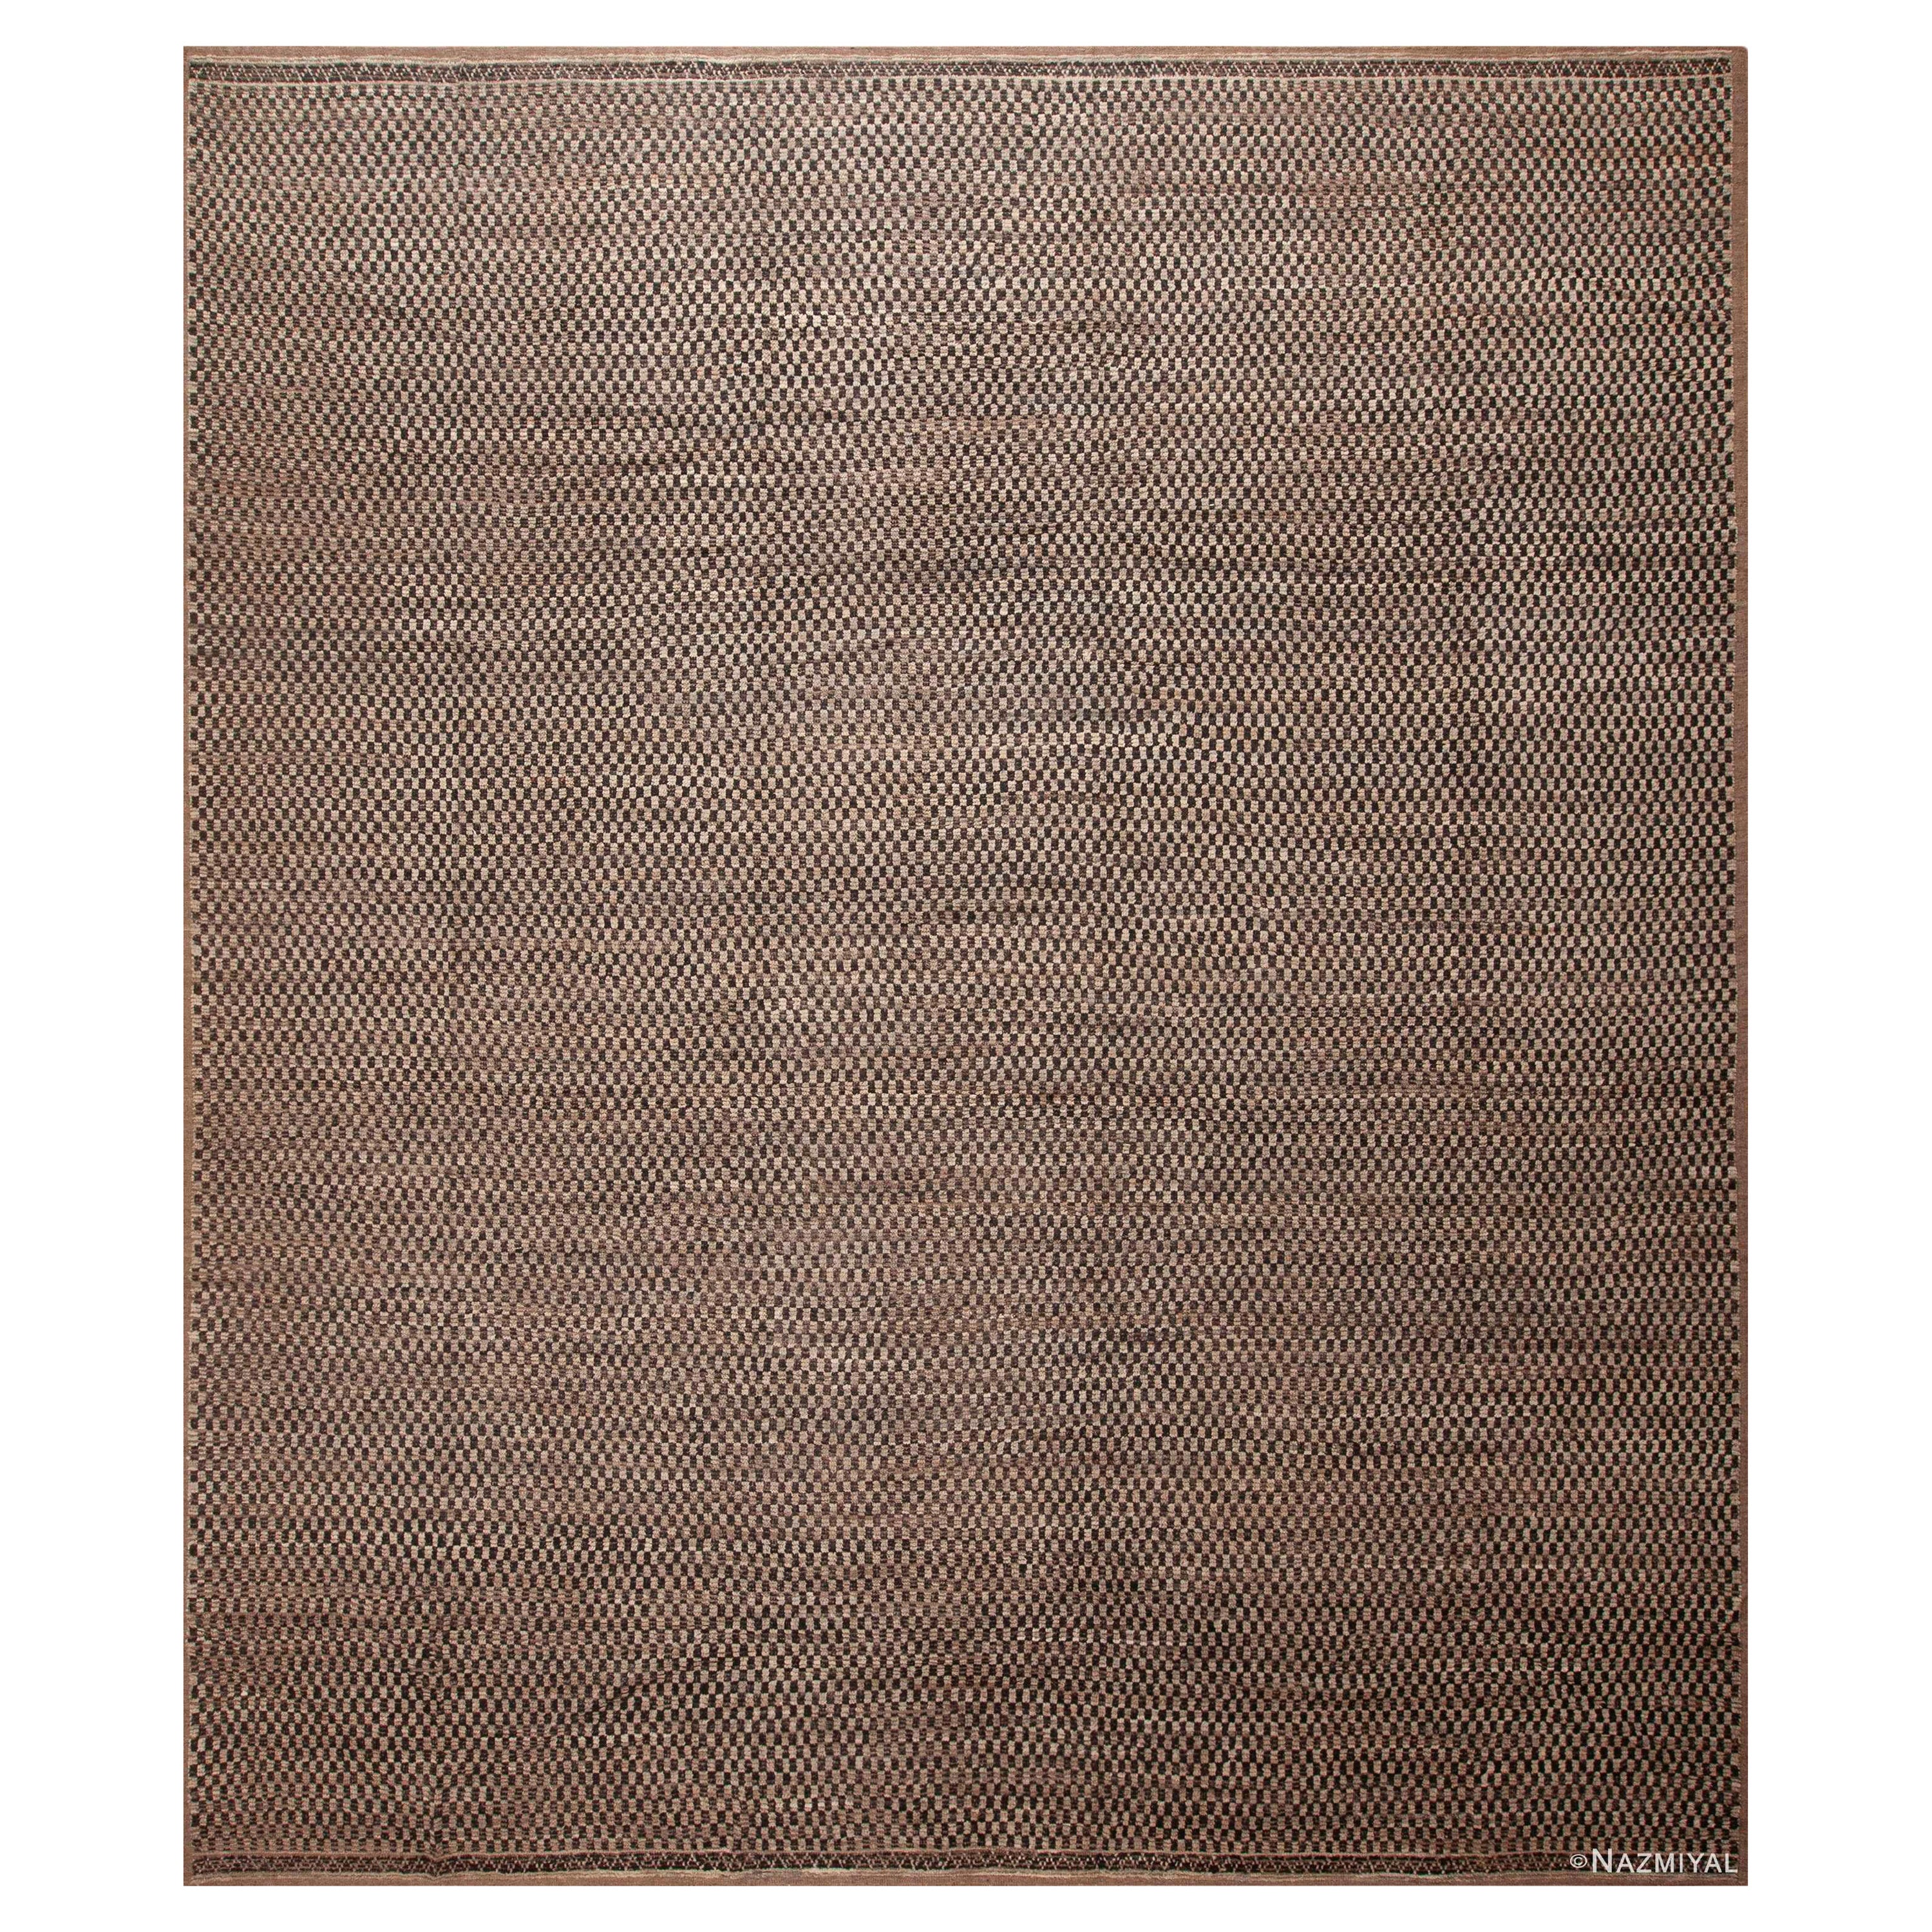 Nazmiyal Collection Earthy Brown Checkerboard Design Modern Rug 13'5" x 15'7" For Sale